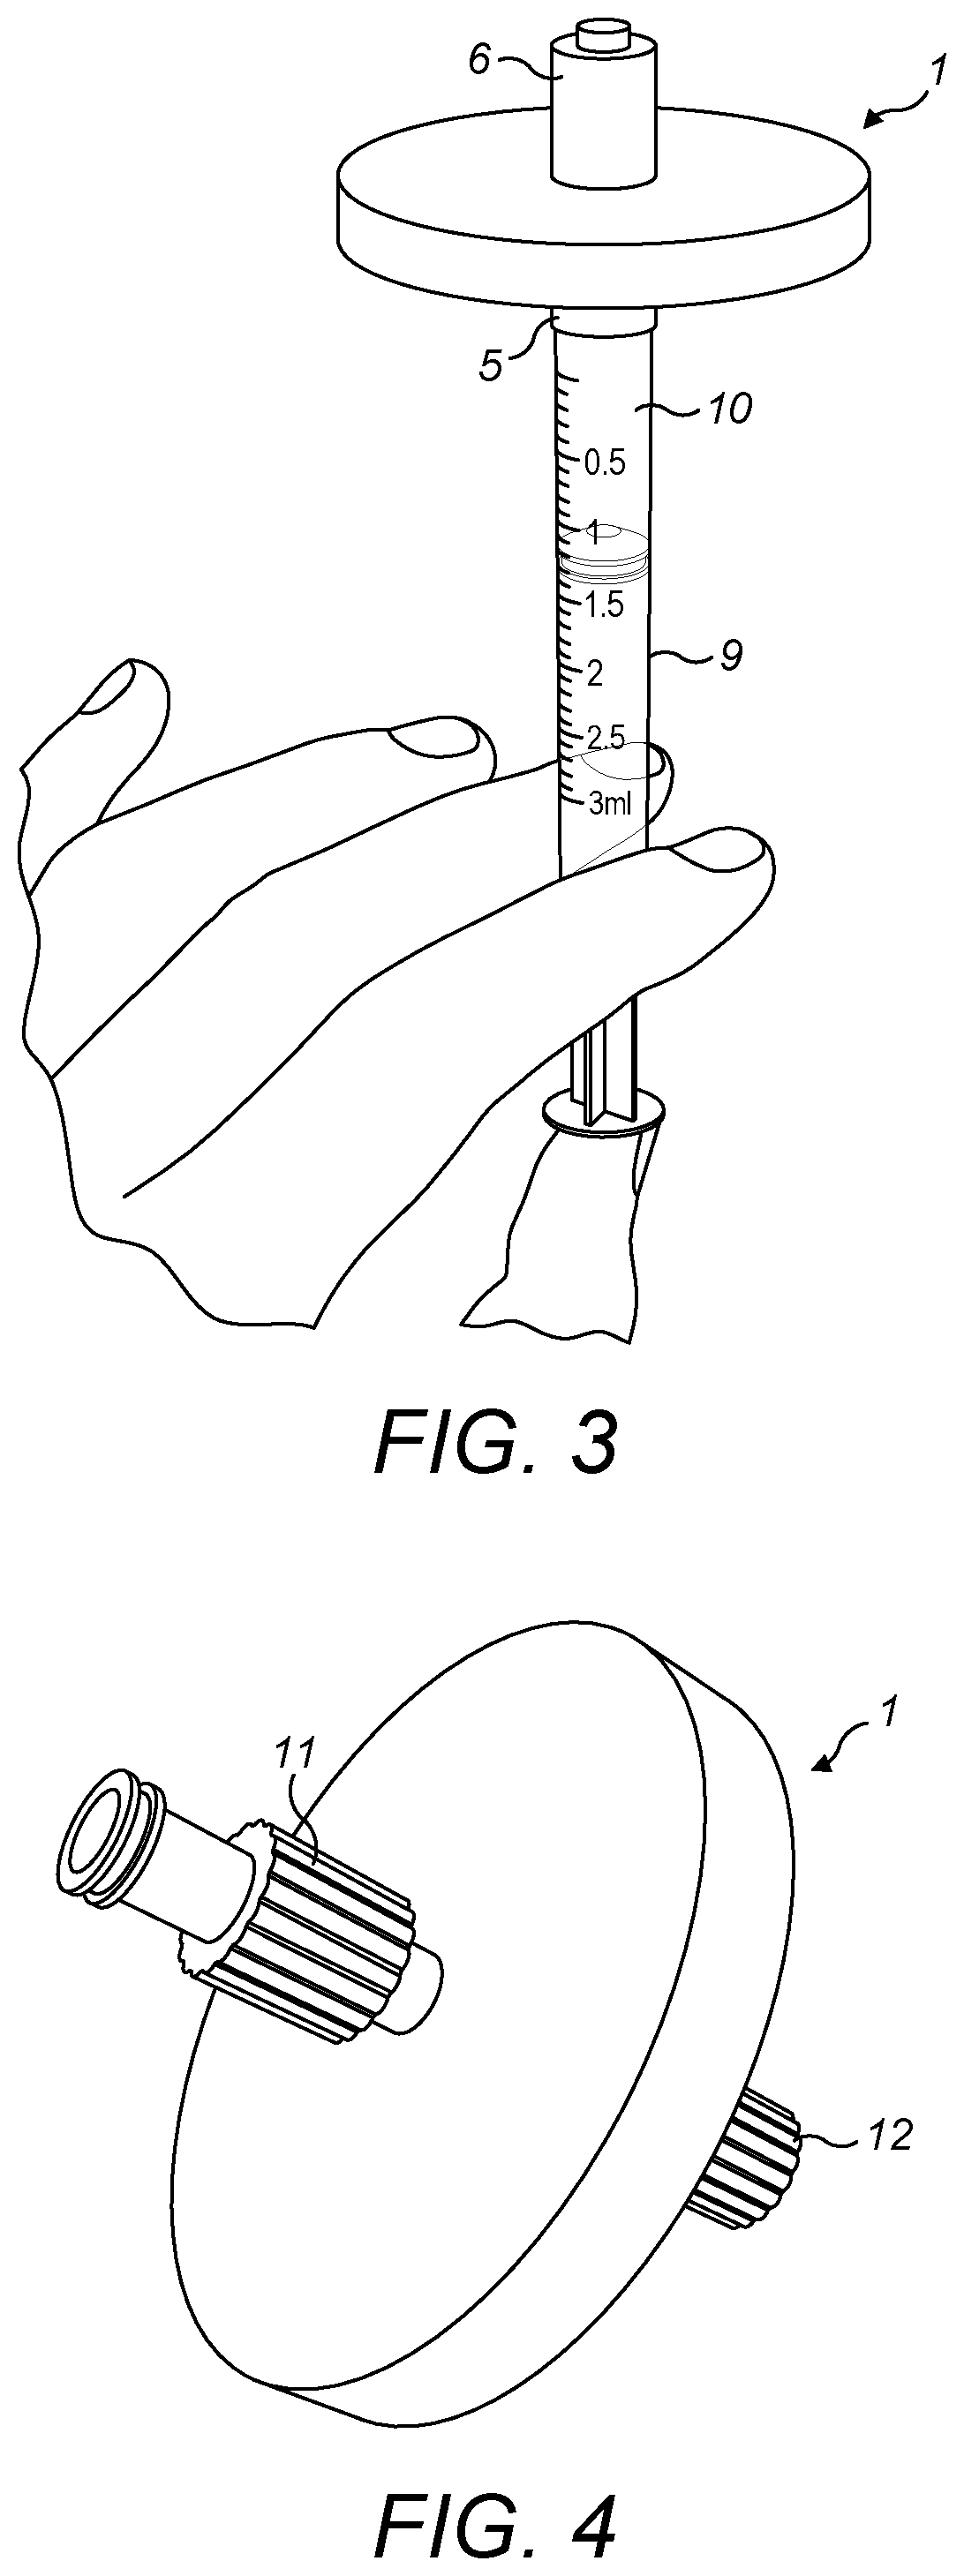 Filter assembly, kit and methods